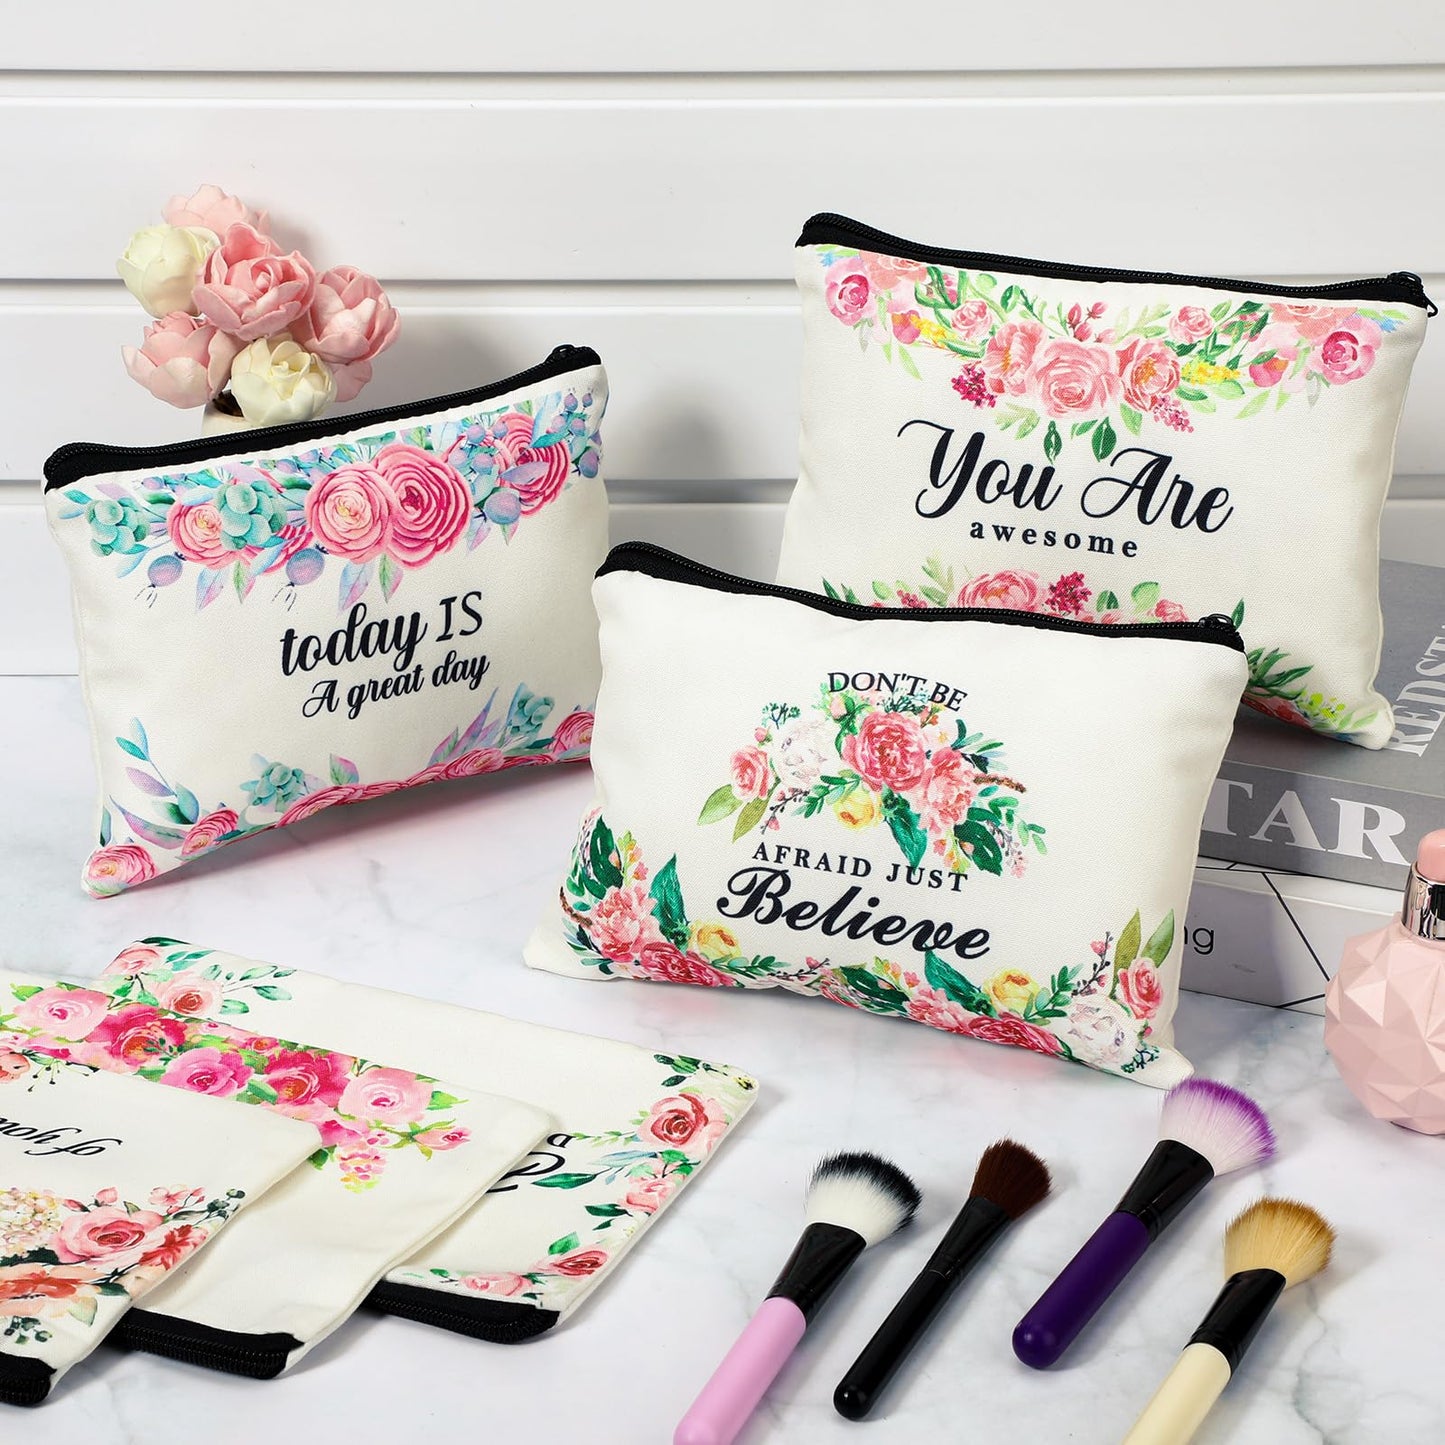 16 Pcs Canvas Cosmetic Bag Bulk Inspirational Quotes Makeup Bags with Zipper Encouragement Travel Toiletry Pouch Appreciation Gift for Christmas Women Girls Teacher Birthday Graduation Gift (Flower)